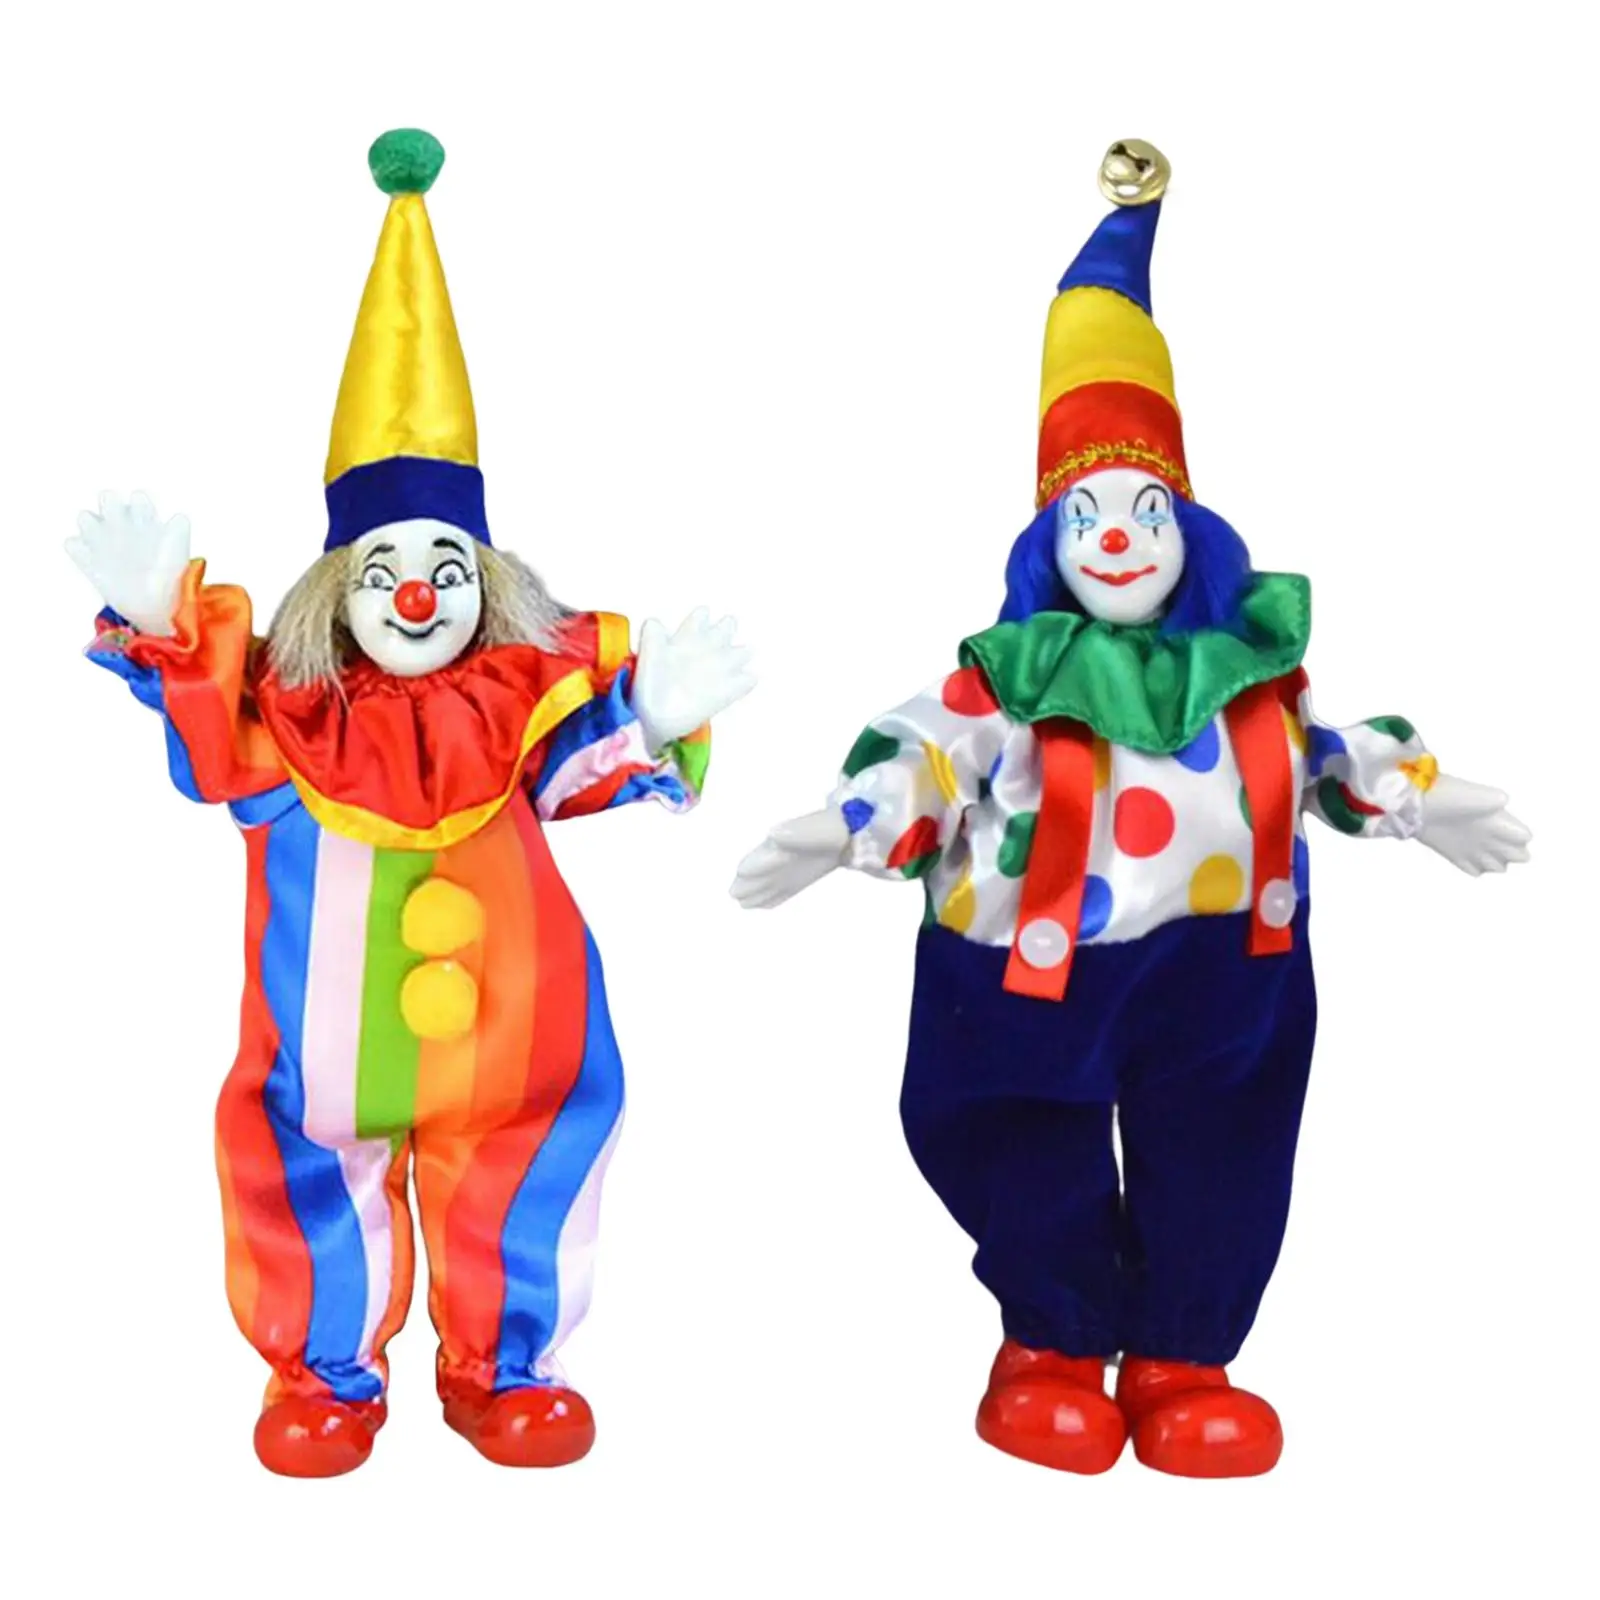 8`` Clown Figurines Doll Crafts Arts Desk Ornaments Display for Table Decors